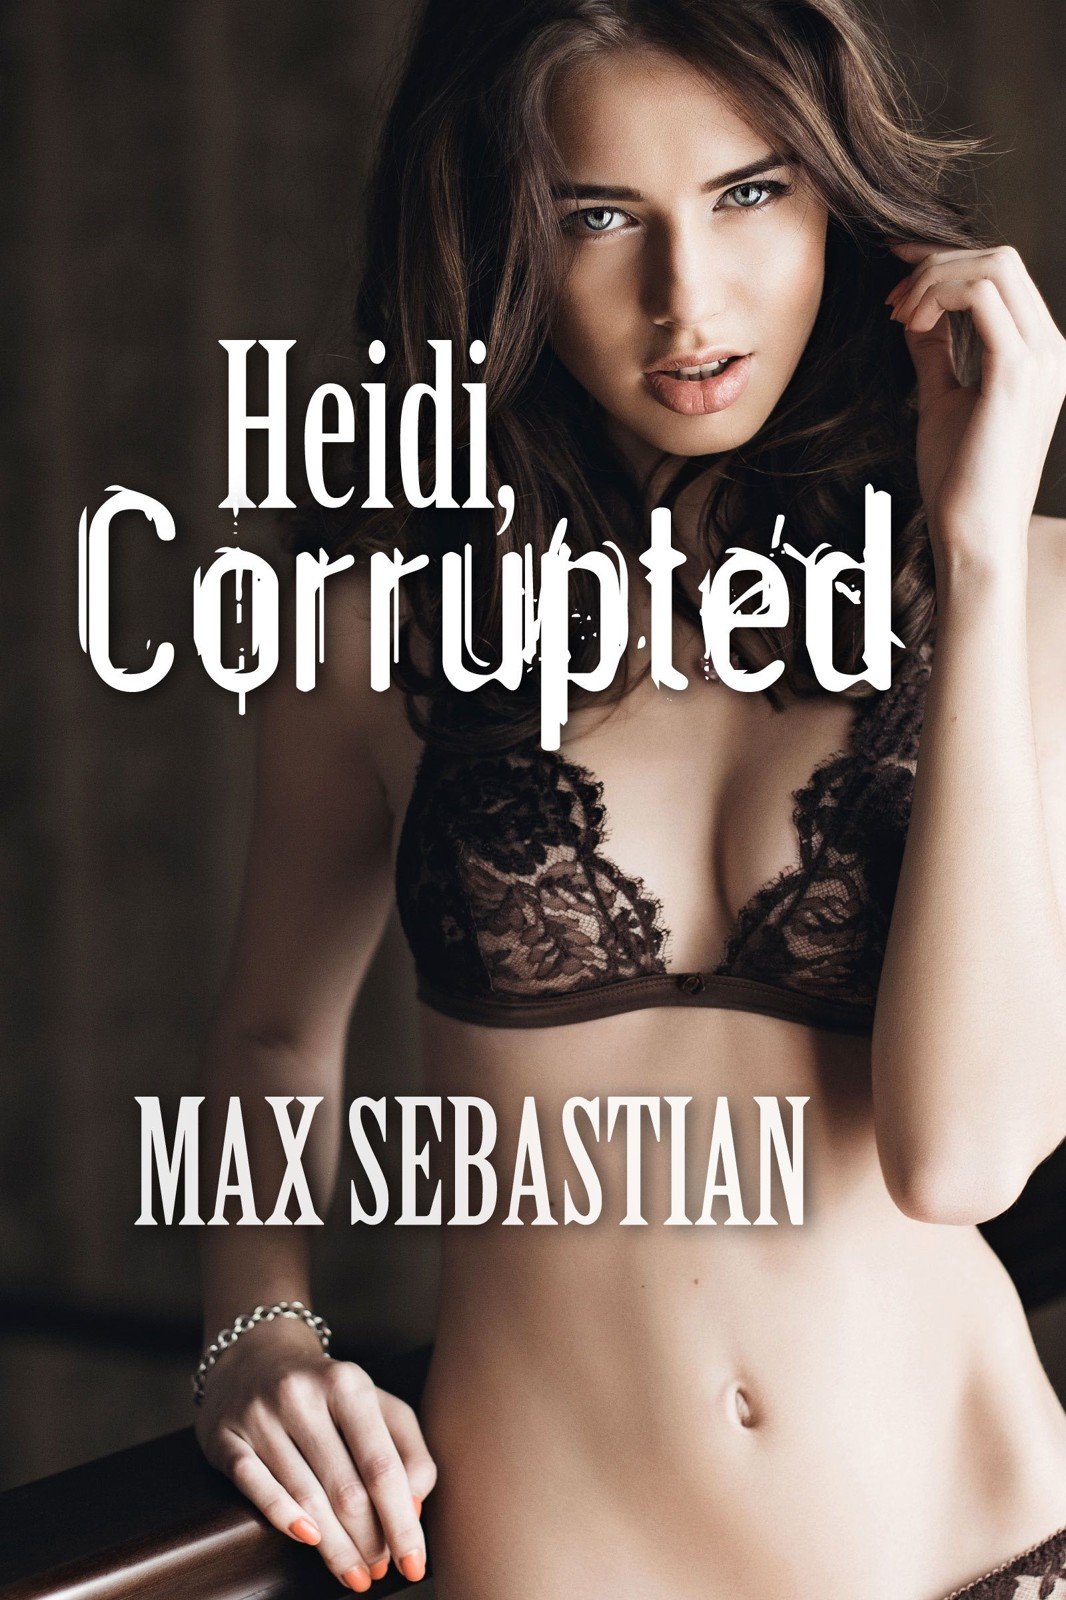 Interview with Max Sebastian